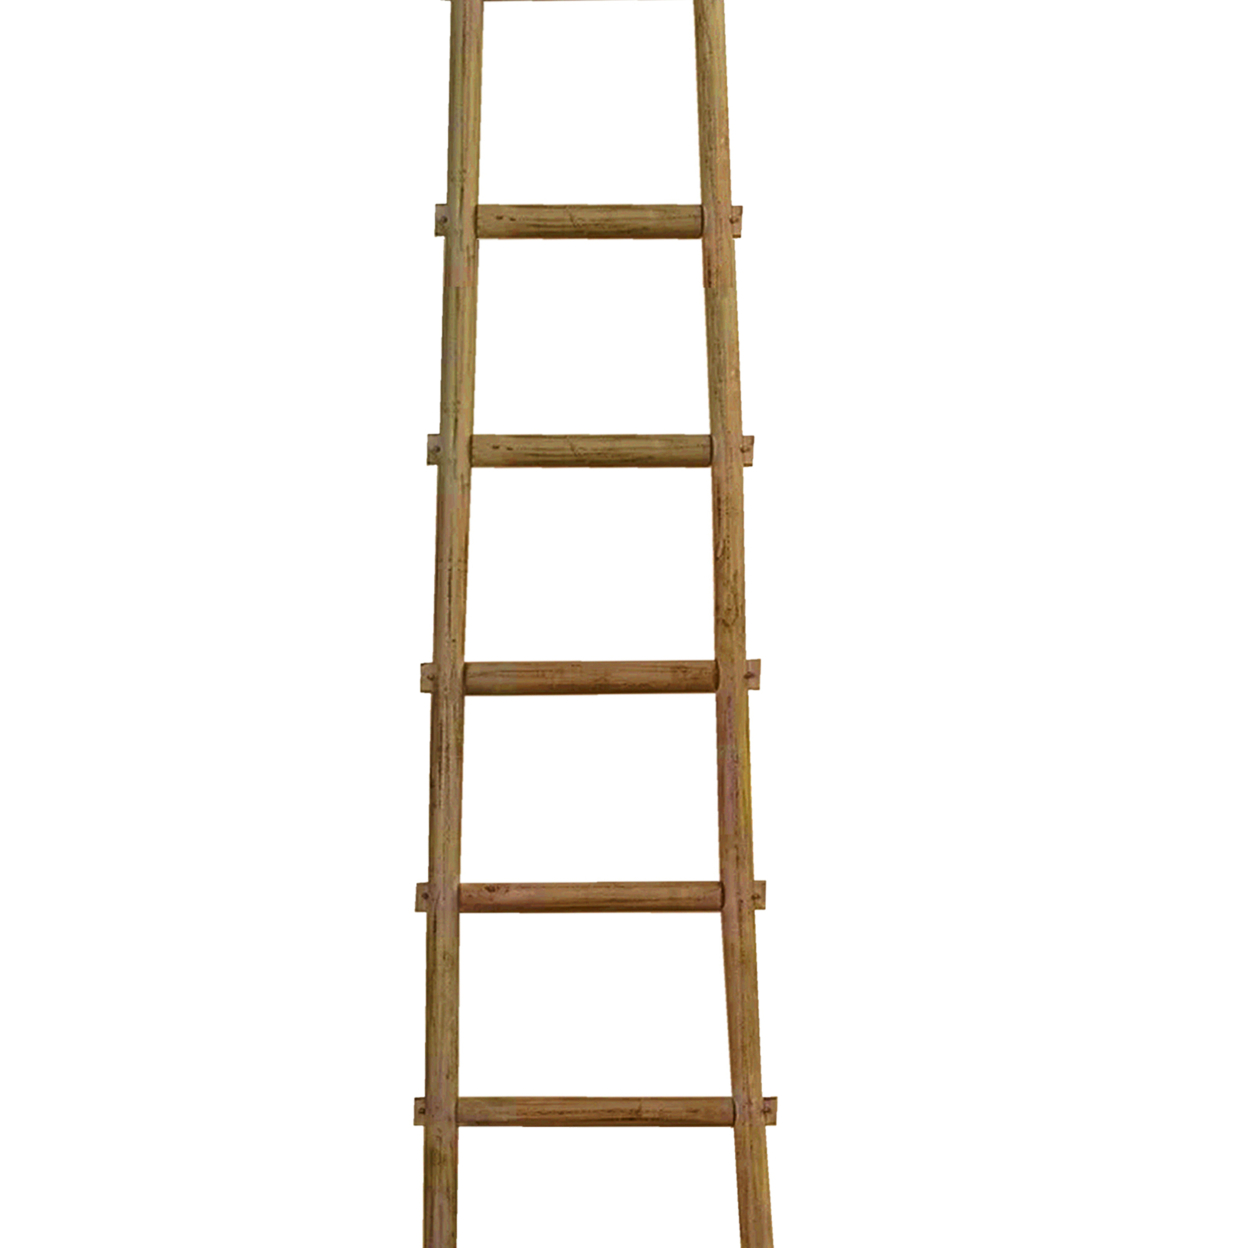 Transitional Style Wooden Decor Ladder With 6 Steps, Brown- Saltoro Sherpi